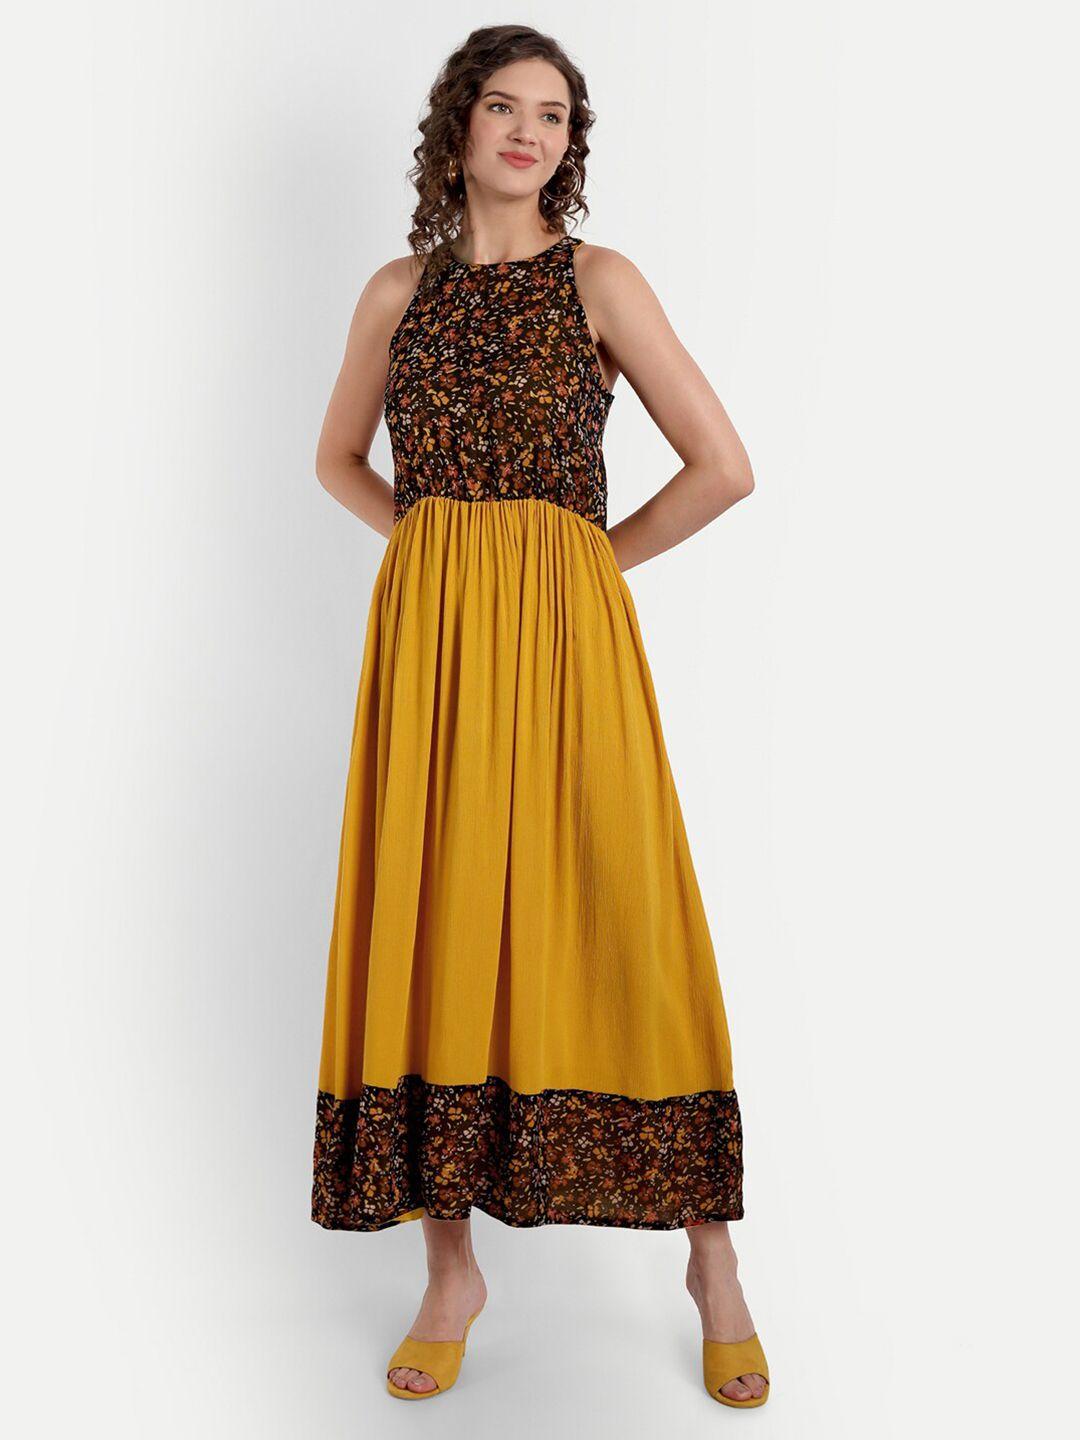 parassio clothings women mustard yellow & black floral georgette maxi dress